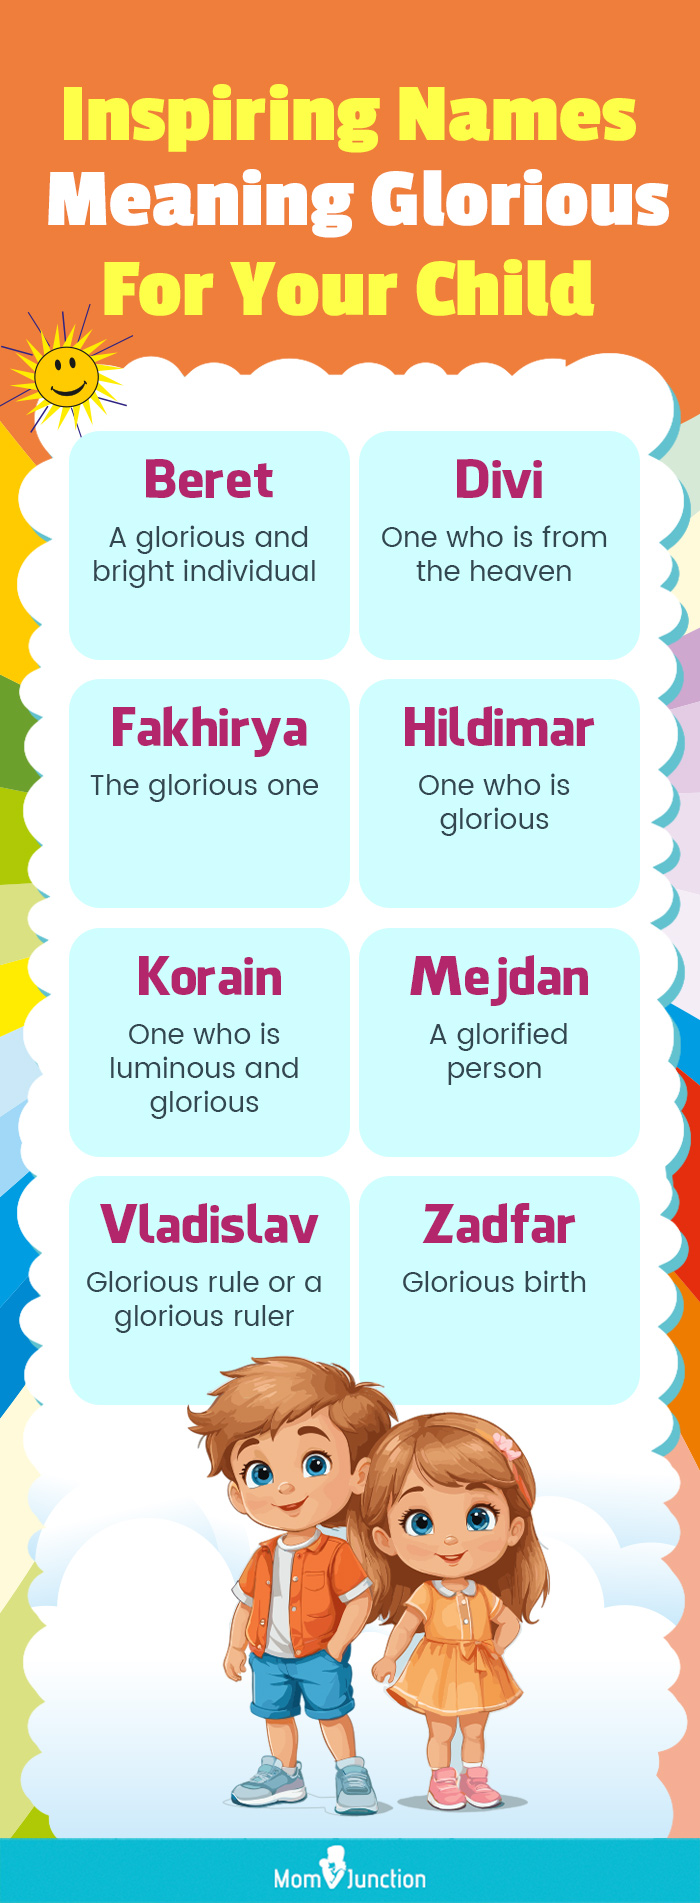 Inspiring Names Meaning Glorious For Your Child (infographic)